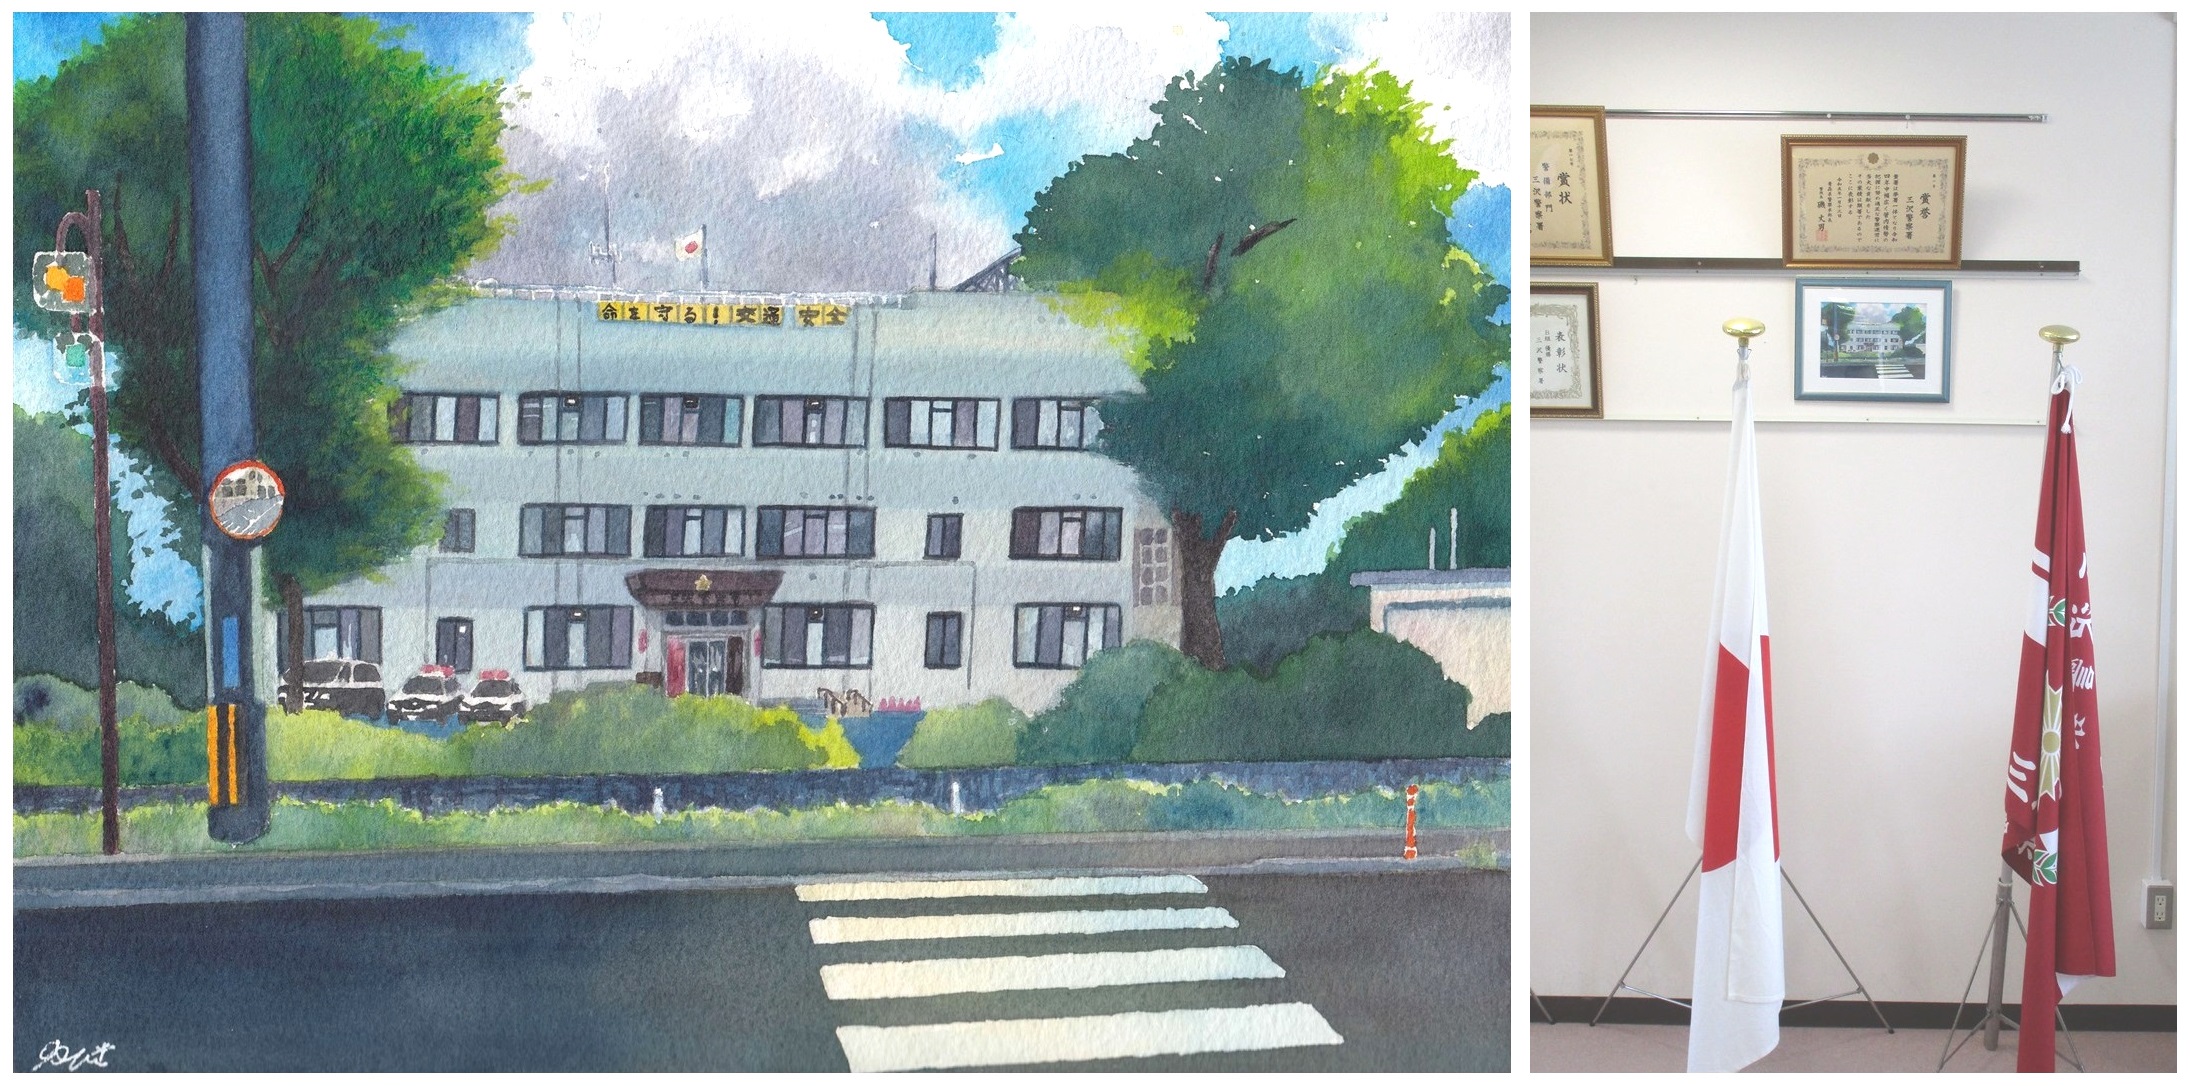 We got a painting of Misawa Police Station